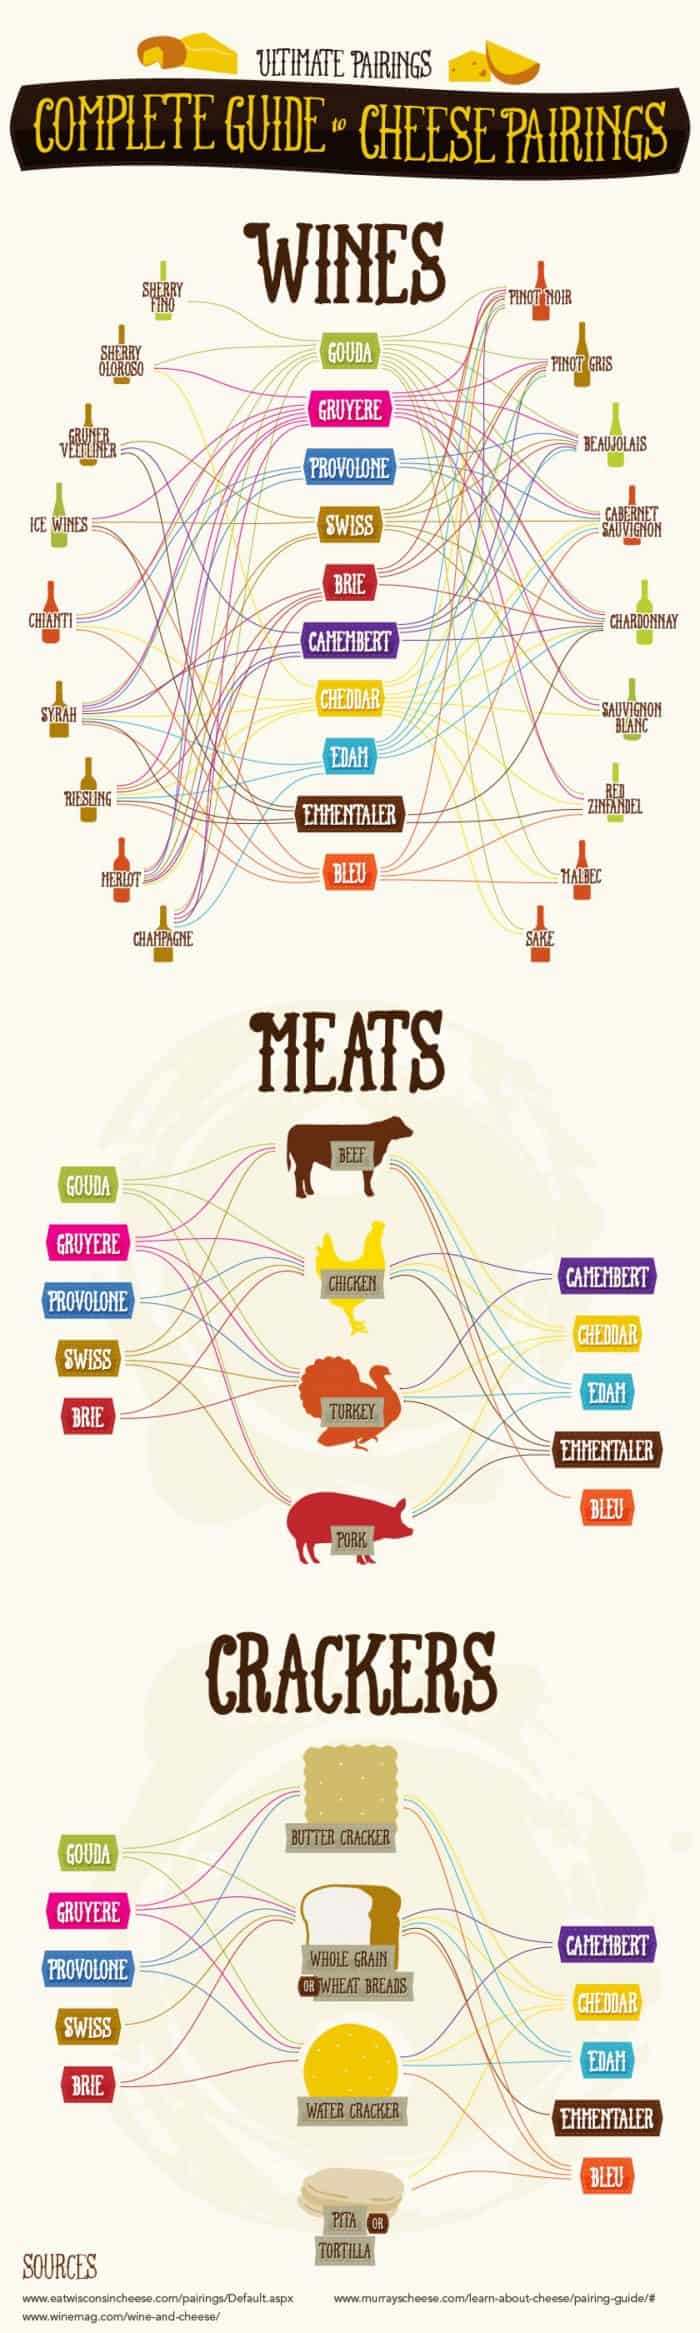 Ultimate Guide to Cheese Pairing Infographic